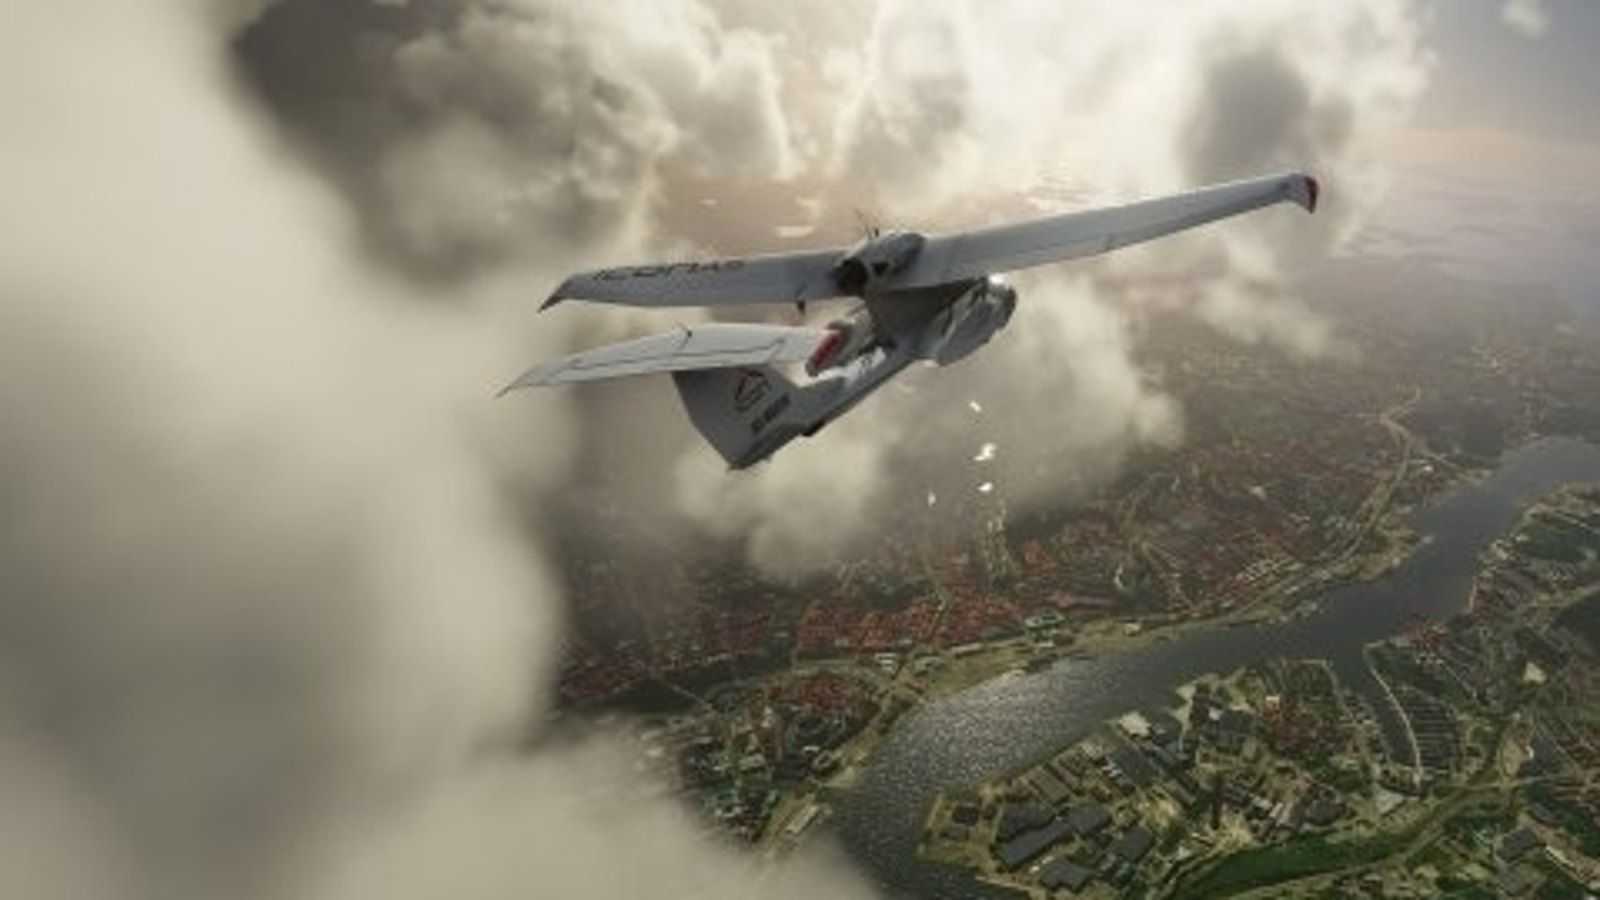 Microsoft Flight Simulator 2024 will not have gamey missions, because we  are not a game